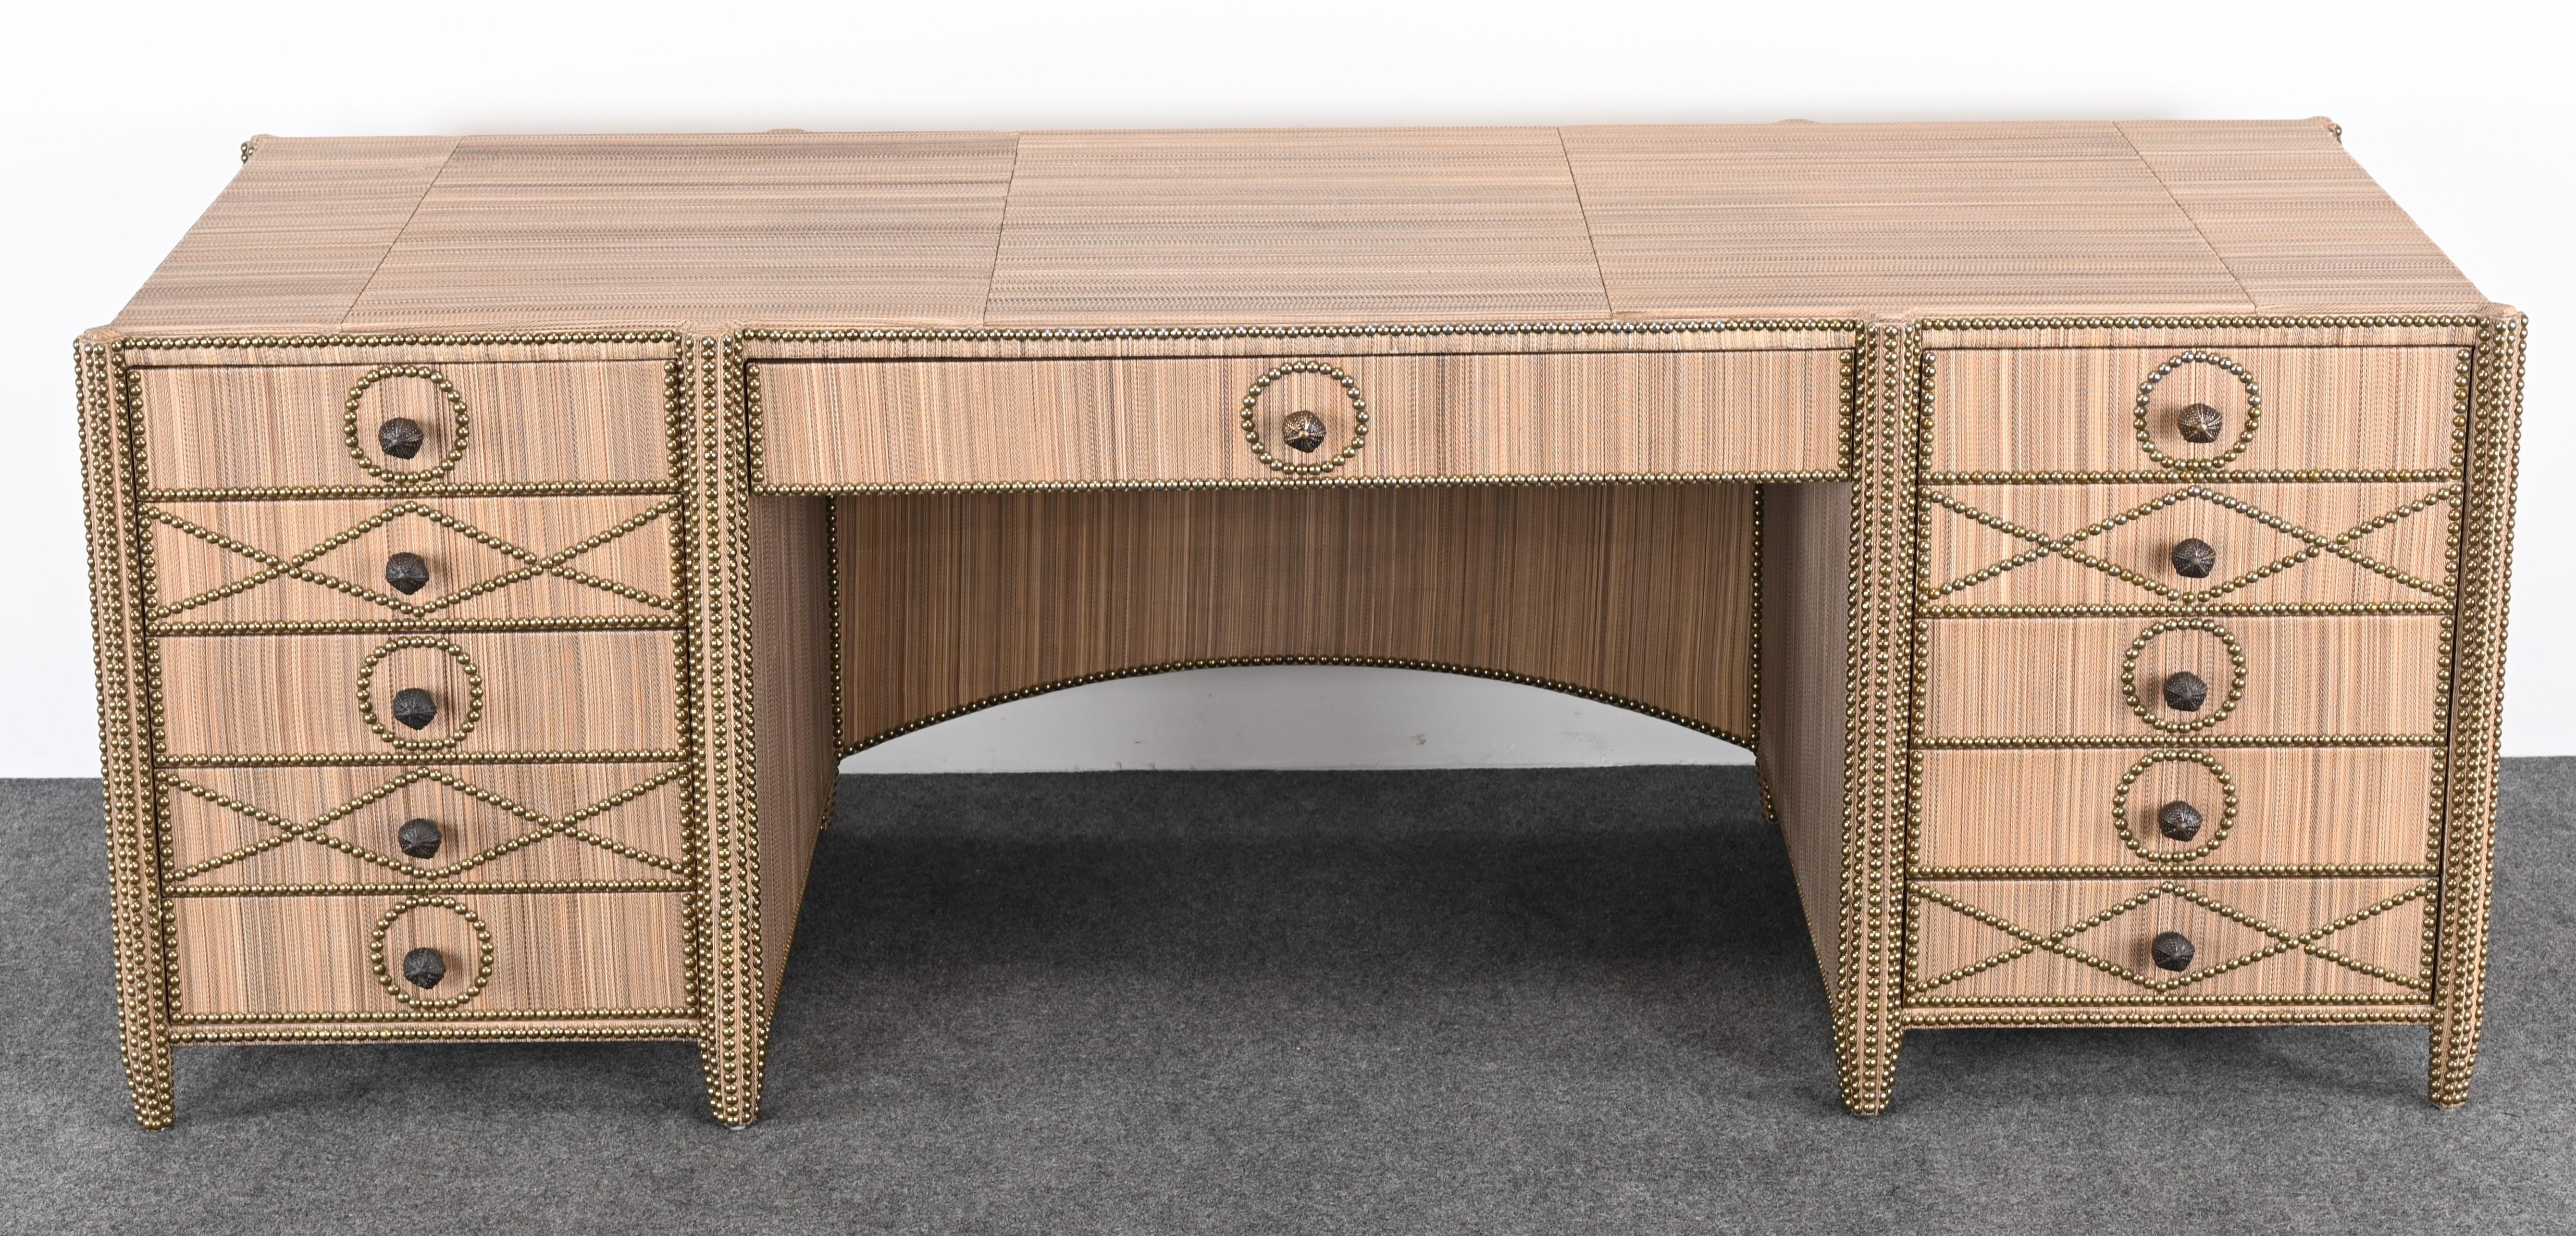 American Monumental Custom Horsehair Desk by Peter Marino, 20th Century USA For Sale